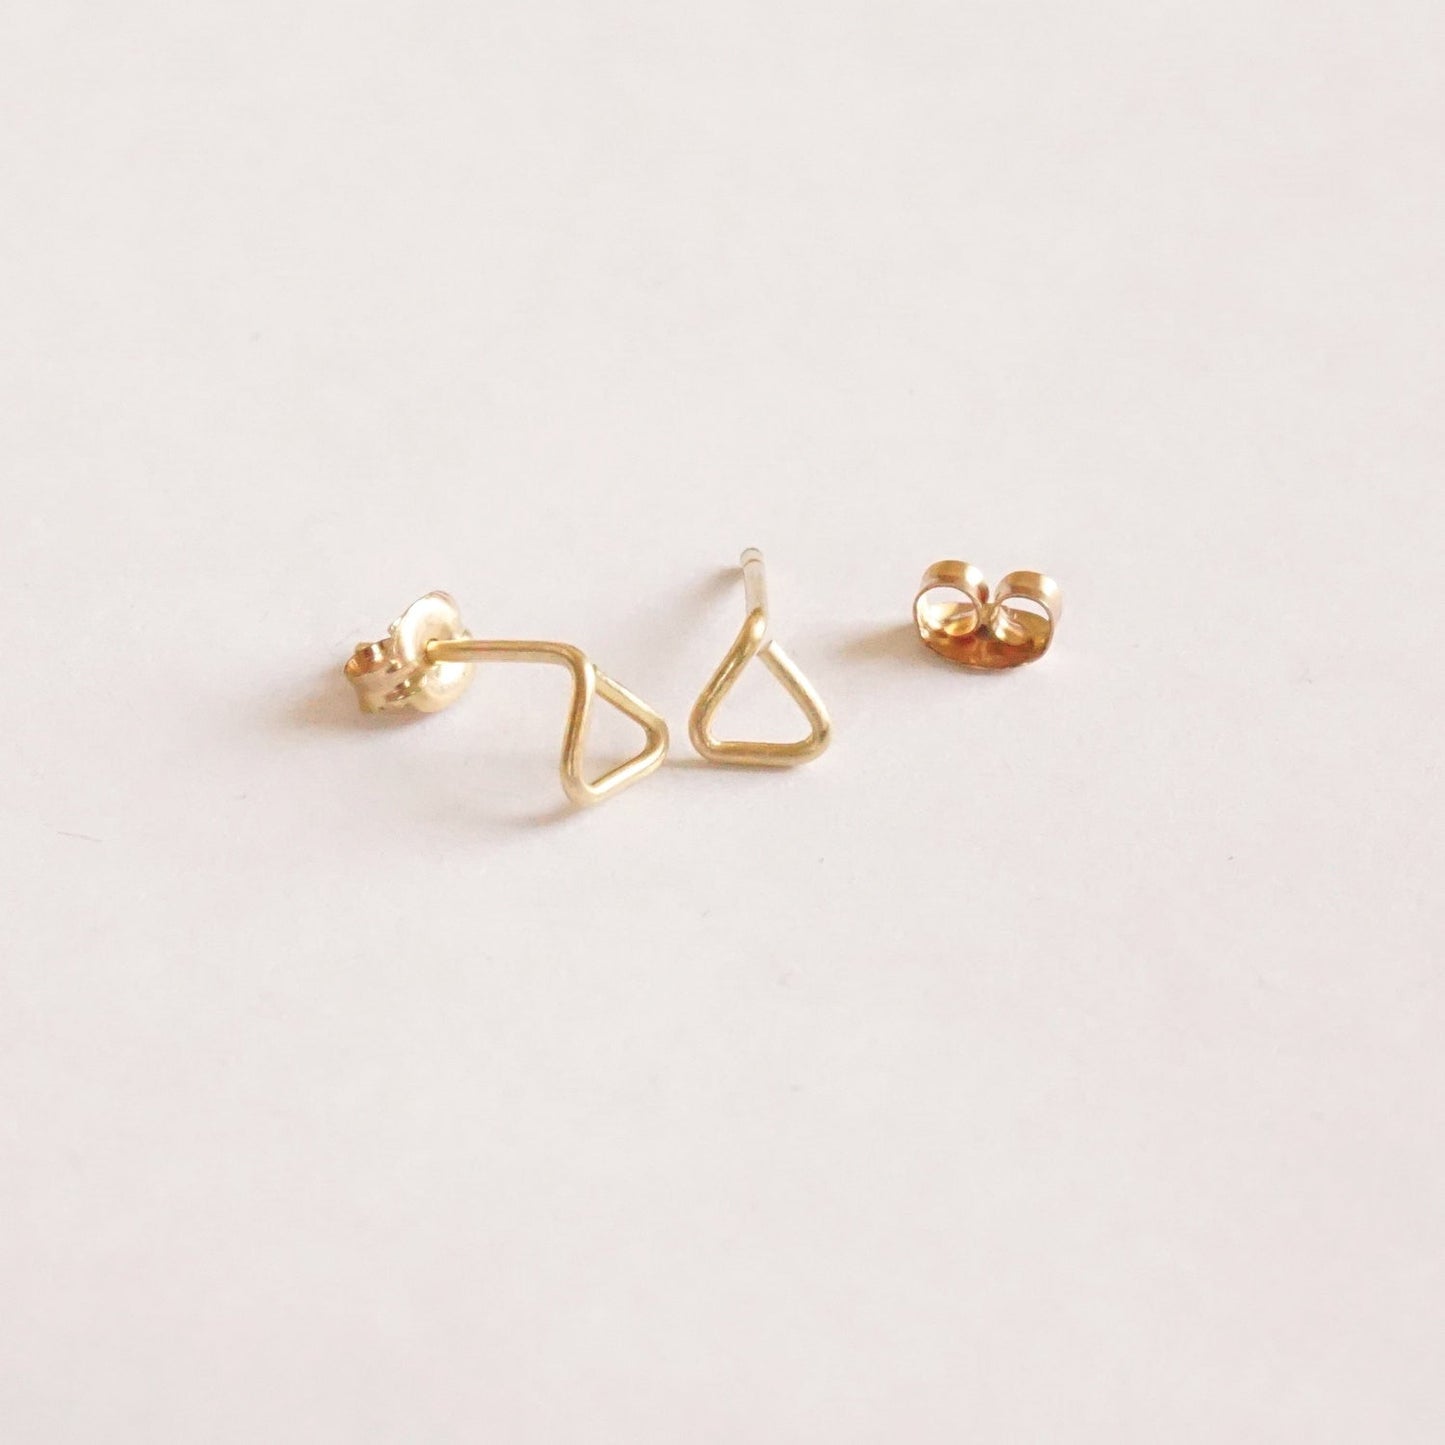 5mm Open Triangle Stud Earrings 015 - Patination Design